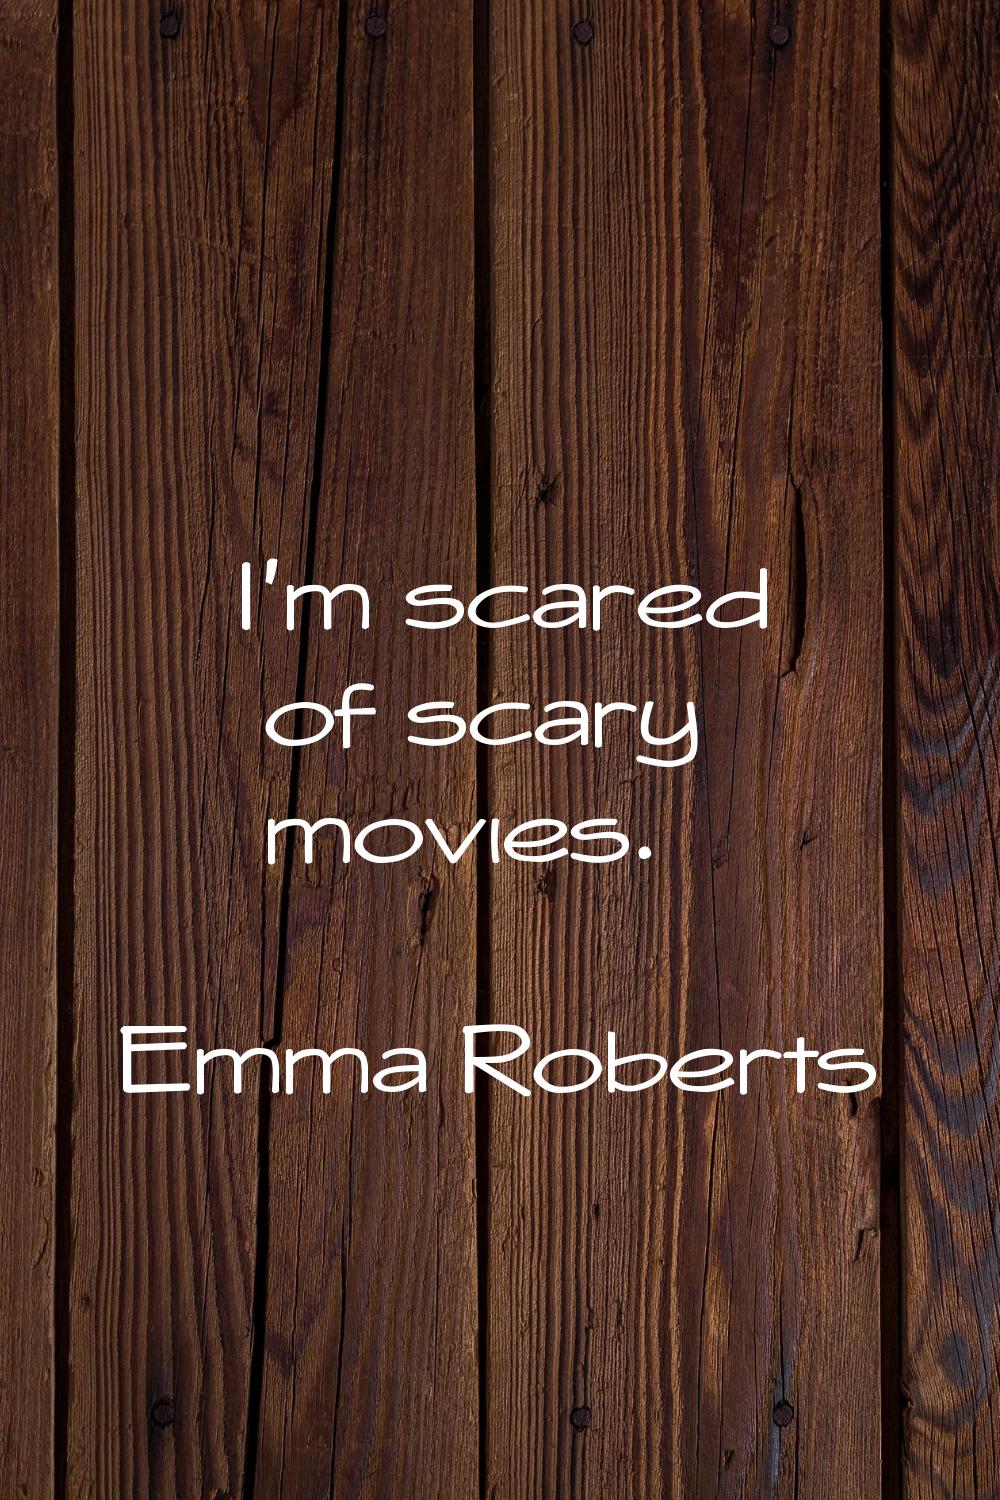 I'm scared of scary movies.